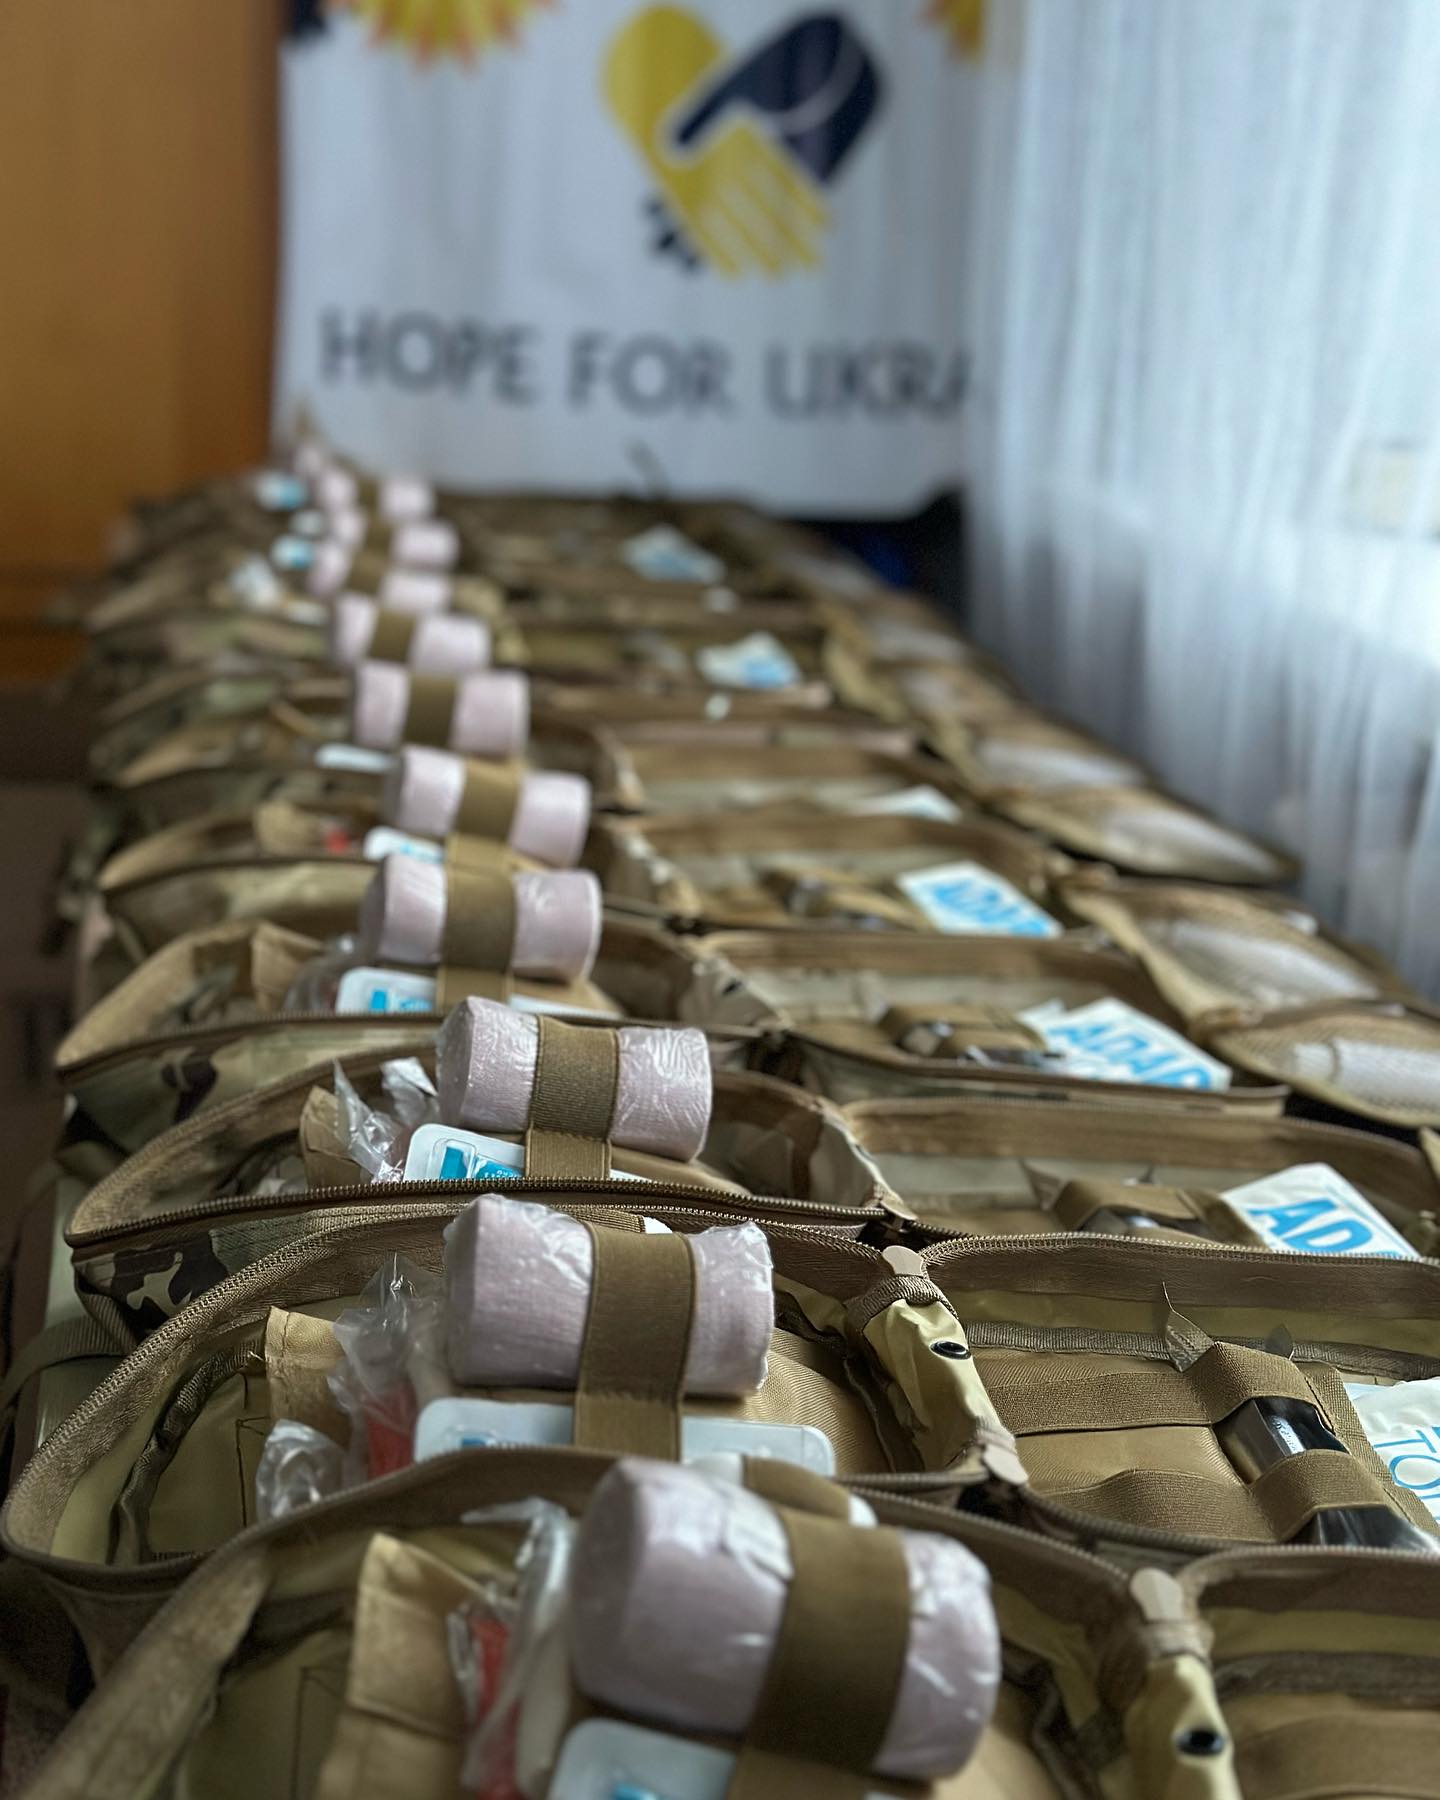 A line of bags with the word hope for ukraine written on them.